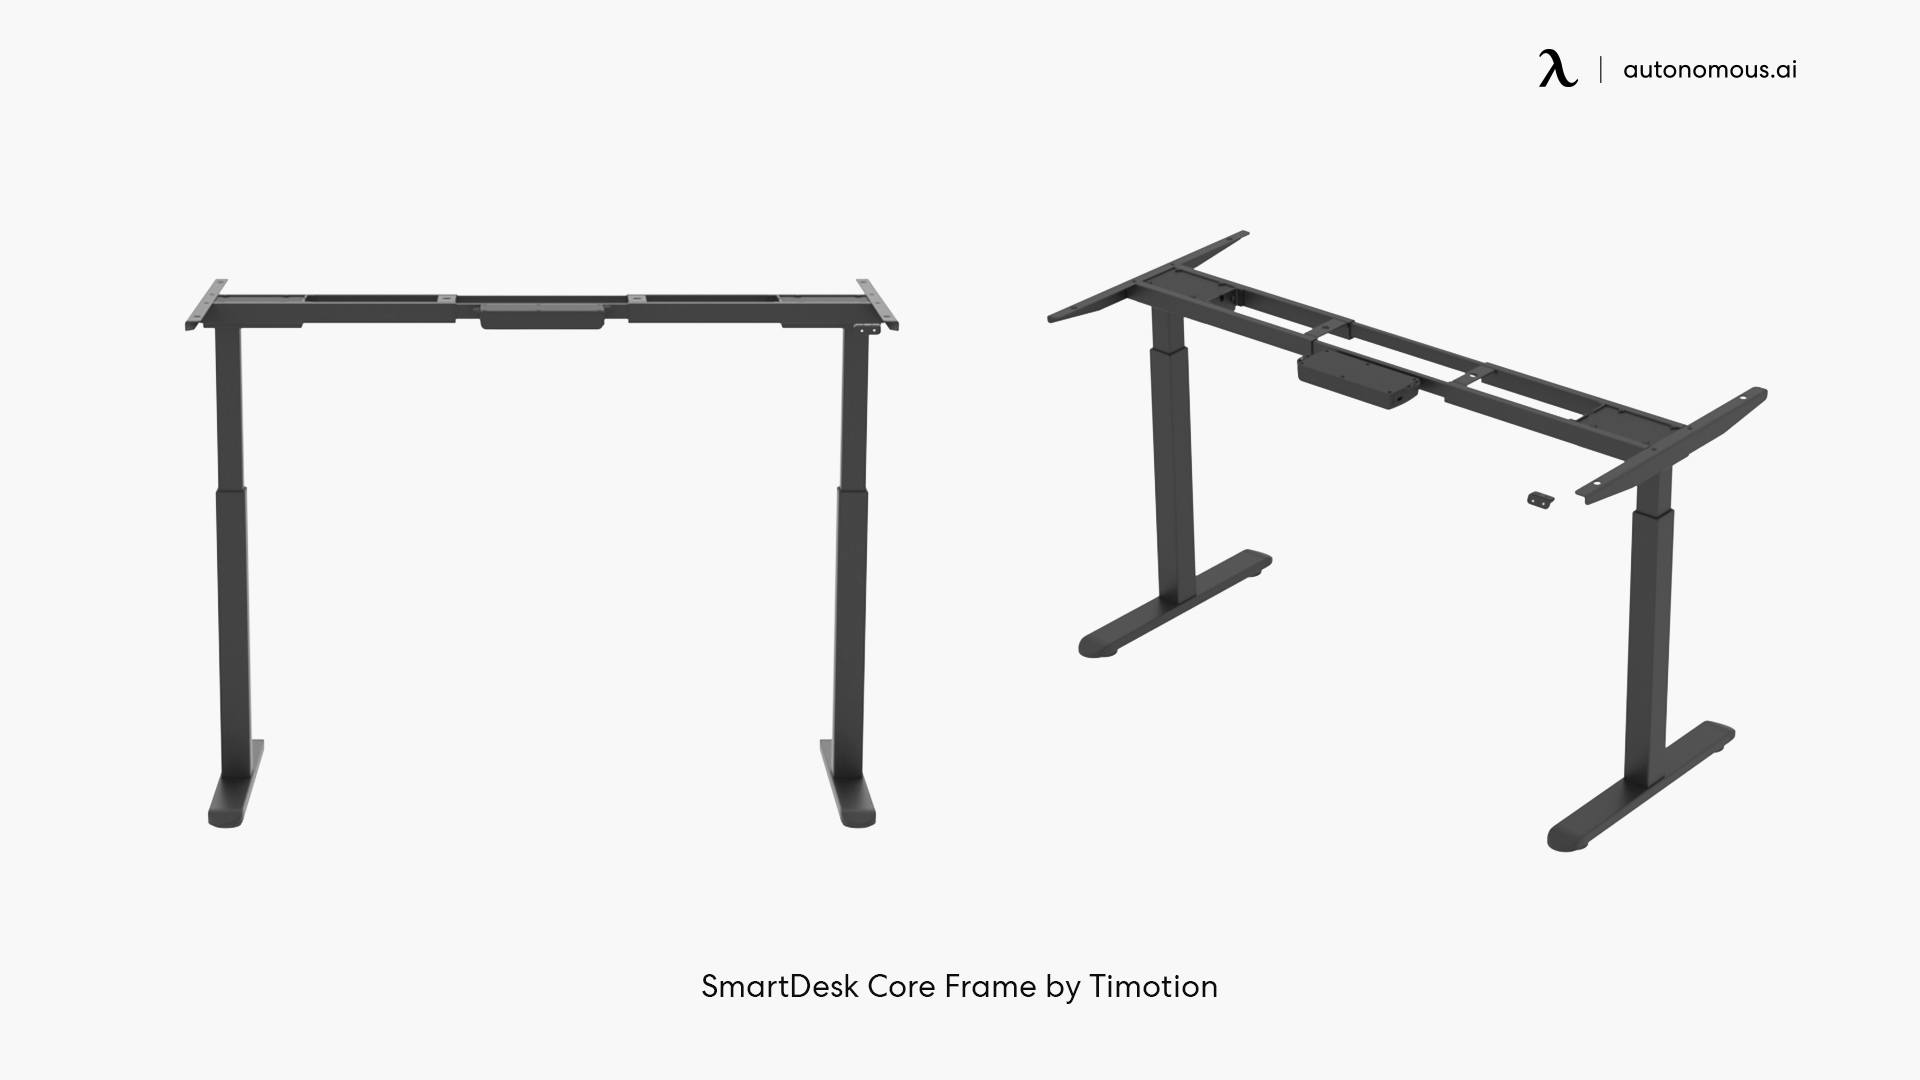 SmartDesk Core Frame by Timotion or Wistopht